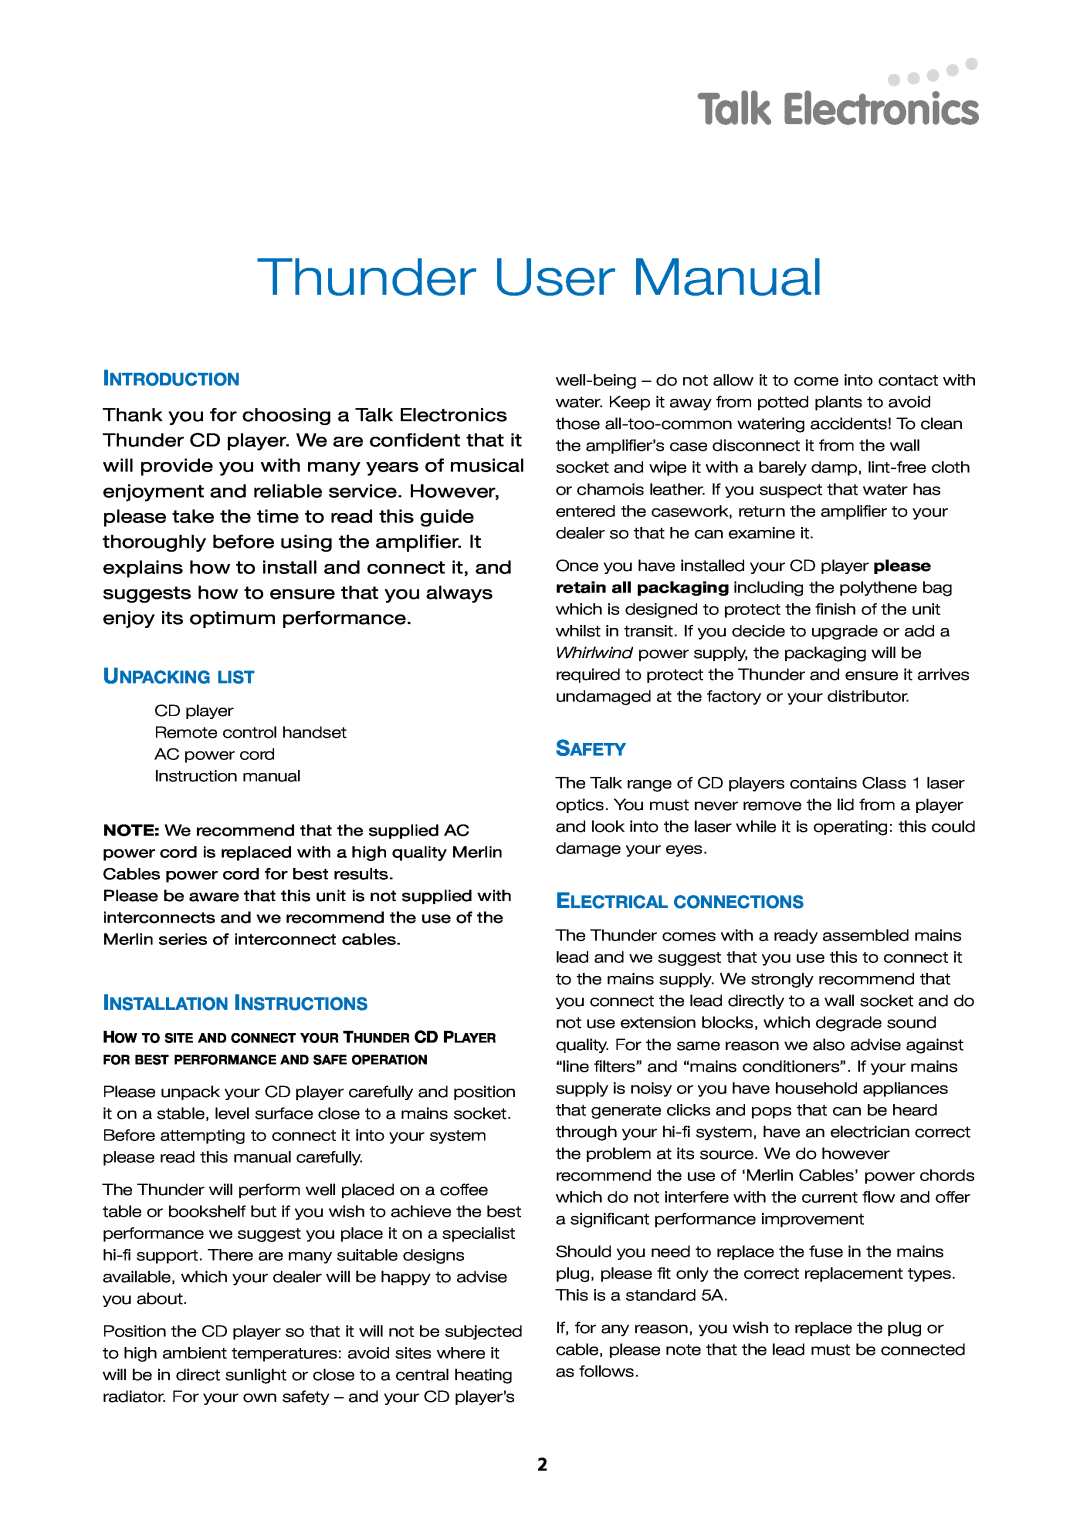 Talk electronic Thunder 2.2 Introduction, Unpacking List, Installation Instructions, Safety, Electrical Connections 